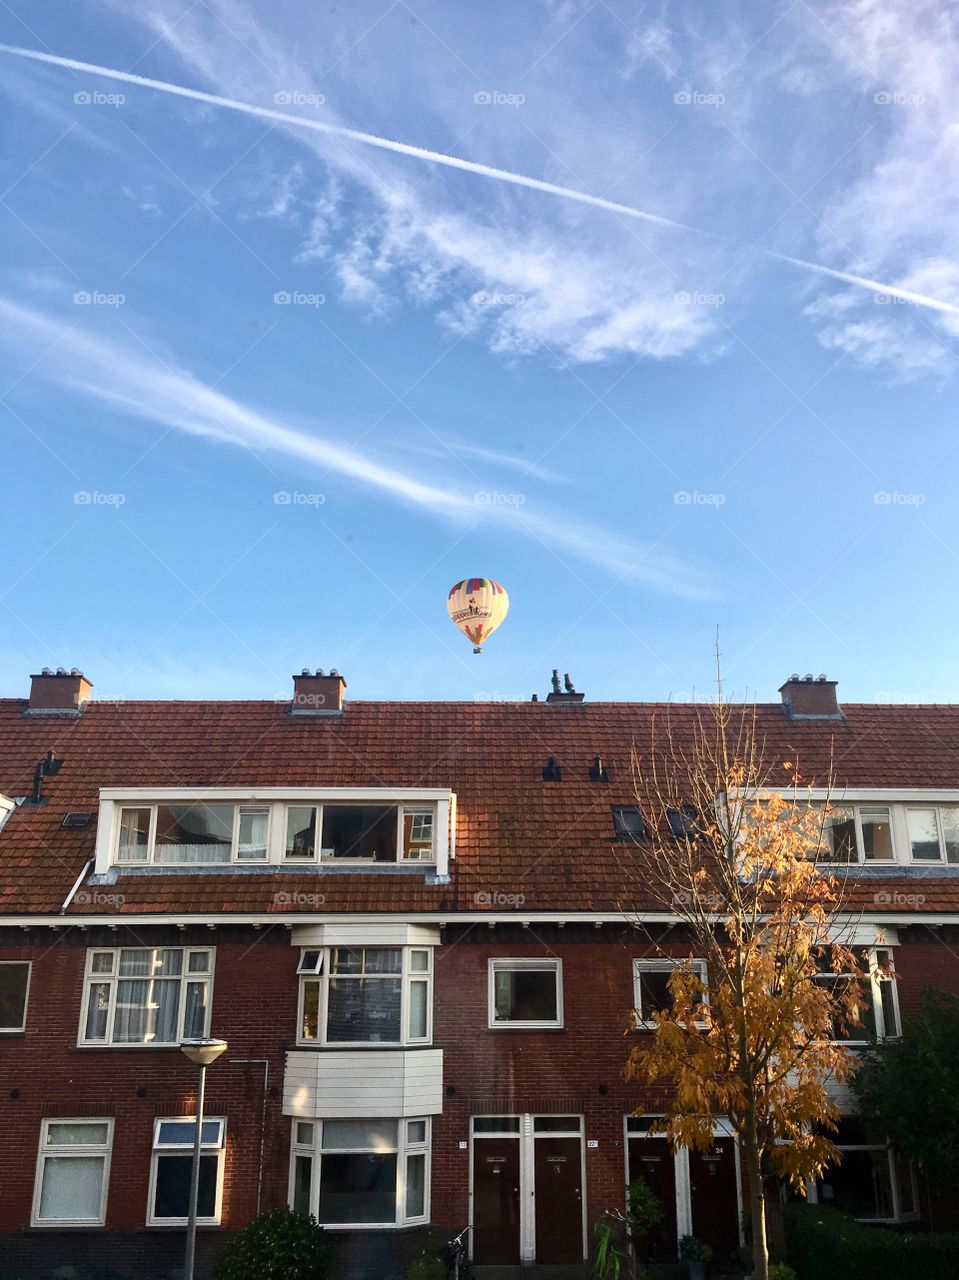 Hot Air Balloon Peering Out From the Neighbourhood